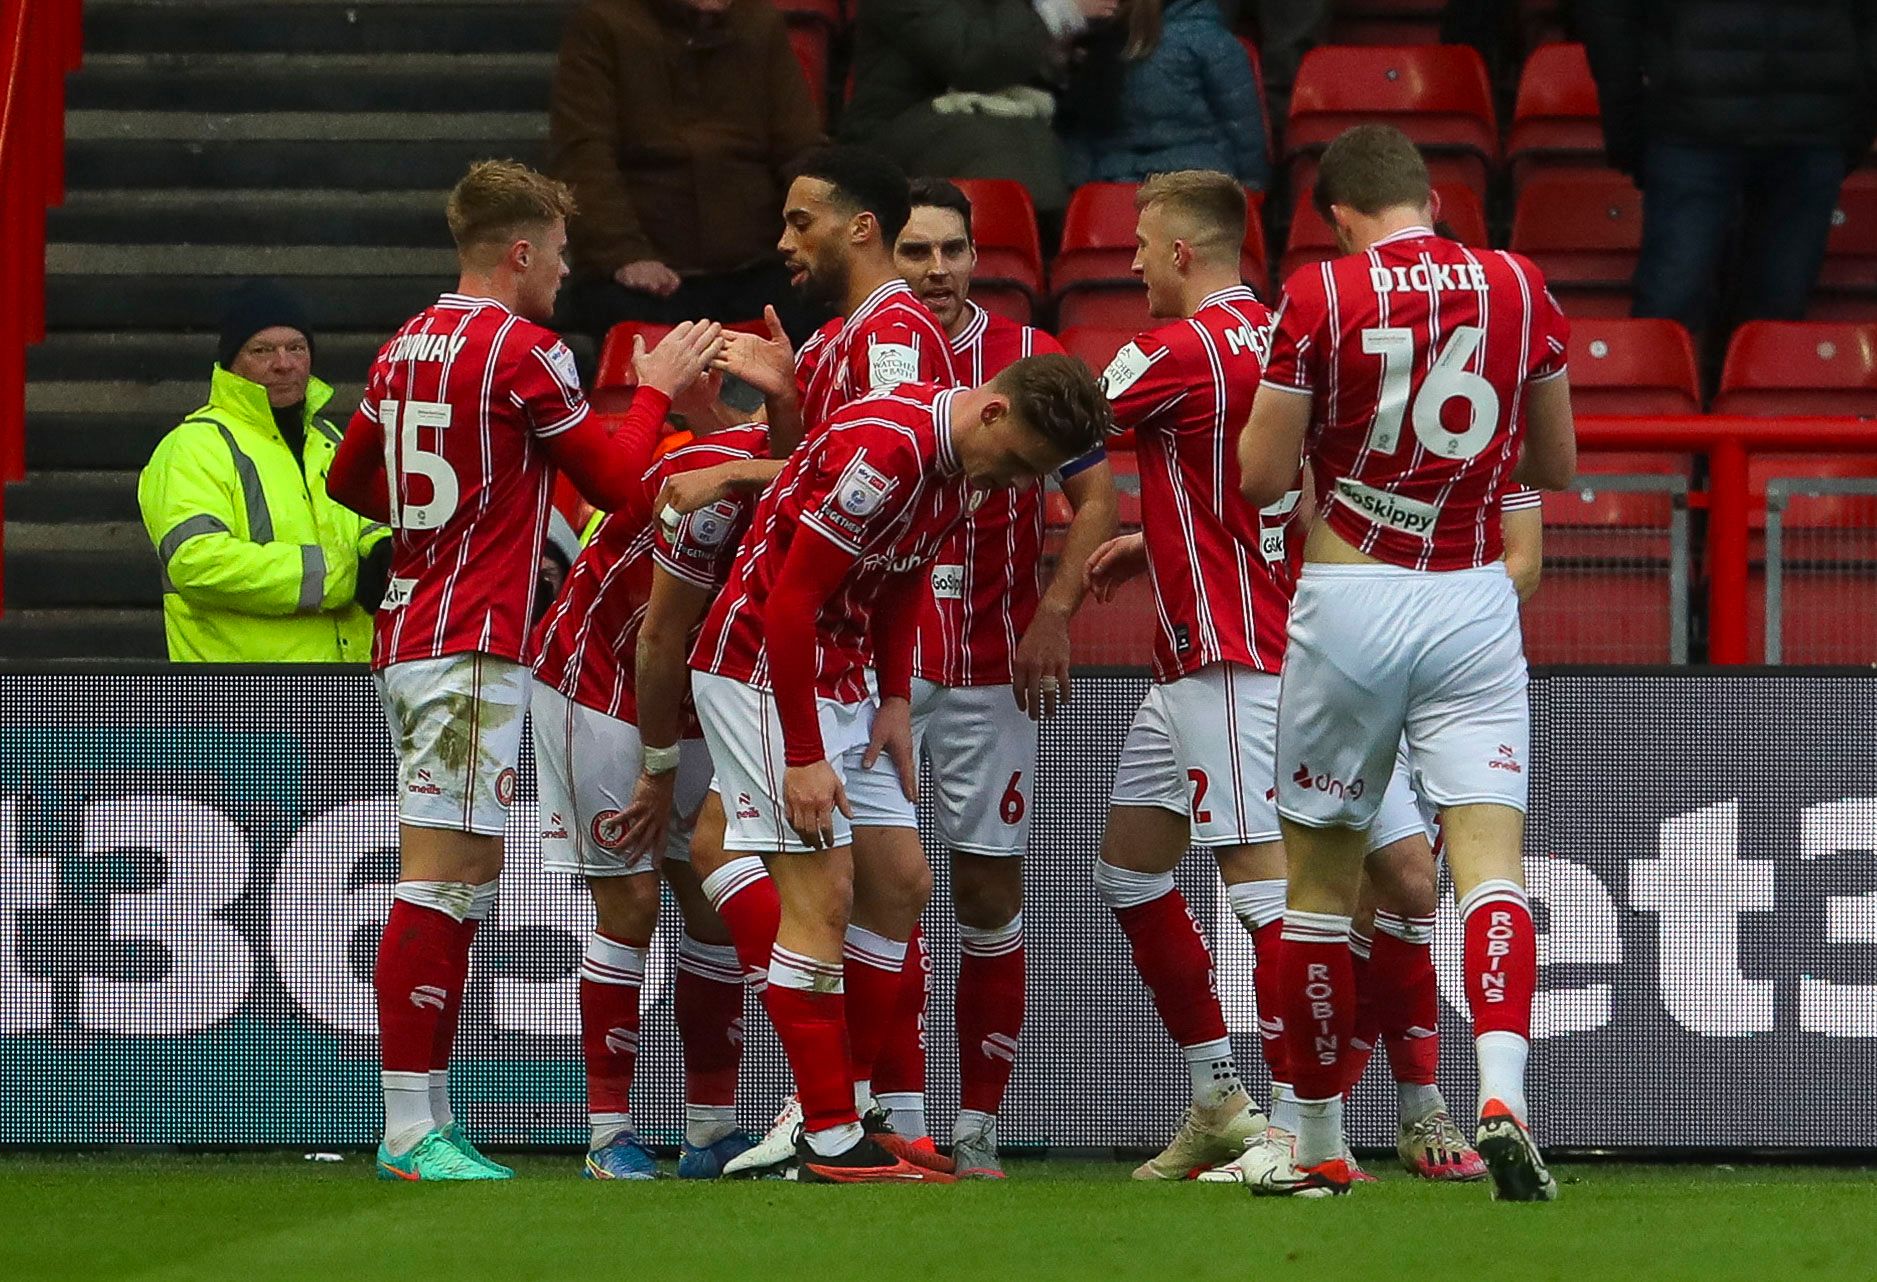 Several Bristol City players celebrate after their team scores a goal